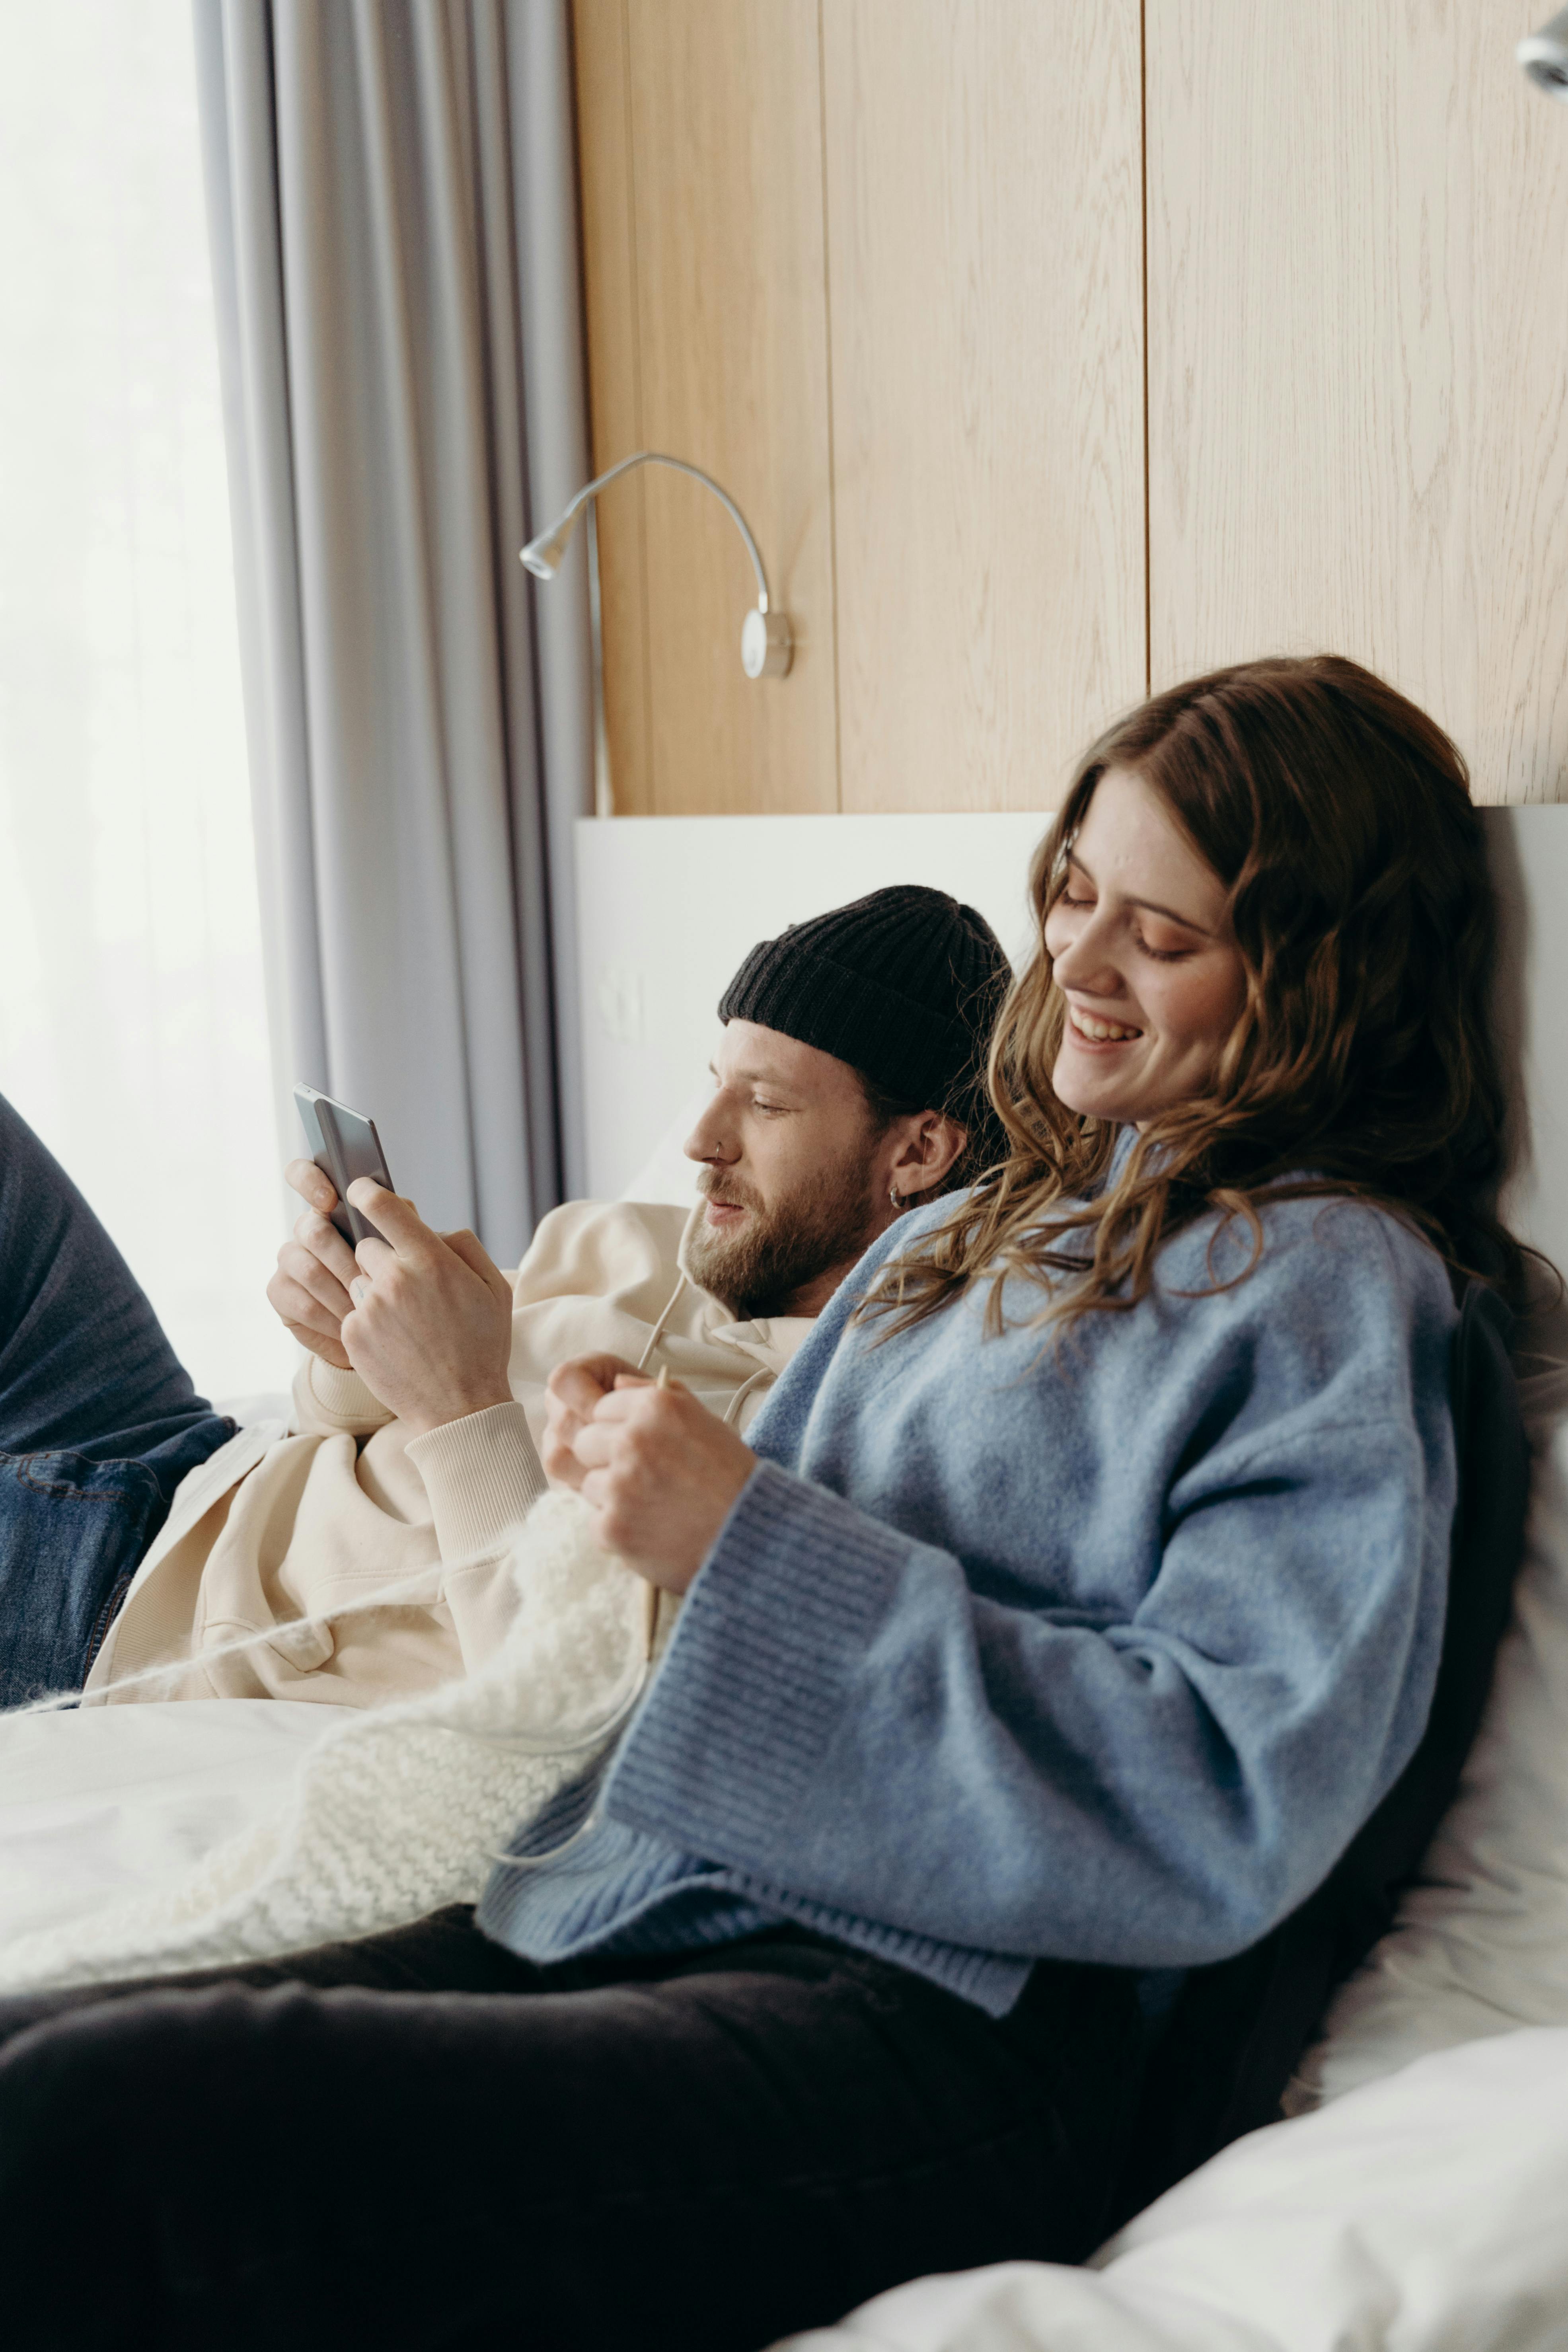 A happy woman knitting while her husband uses his phone | Source: Pexels